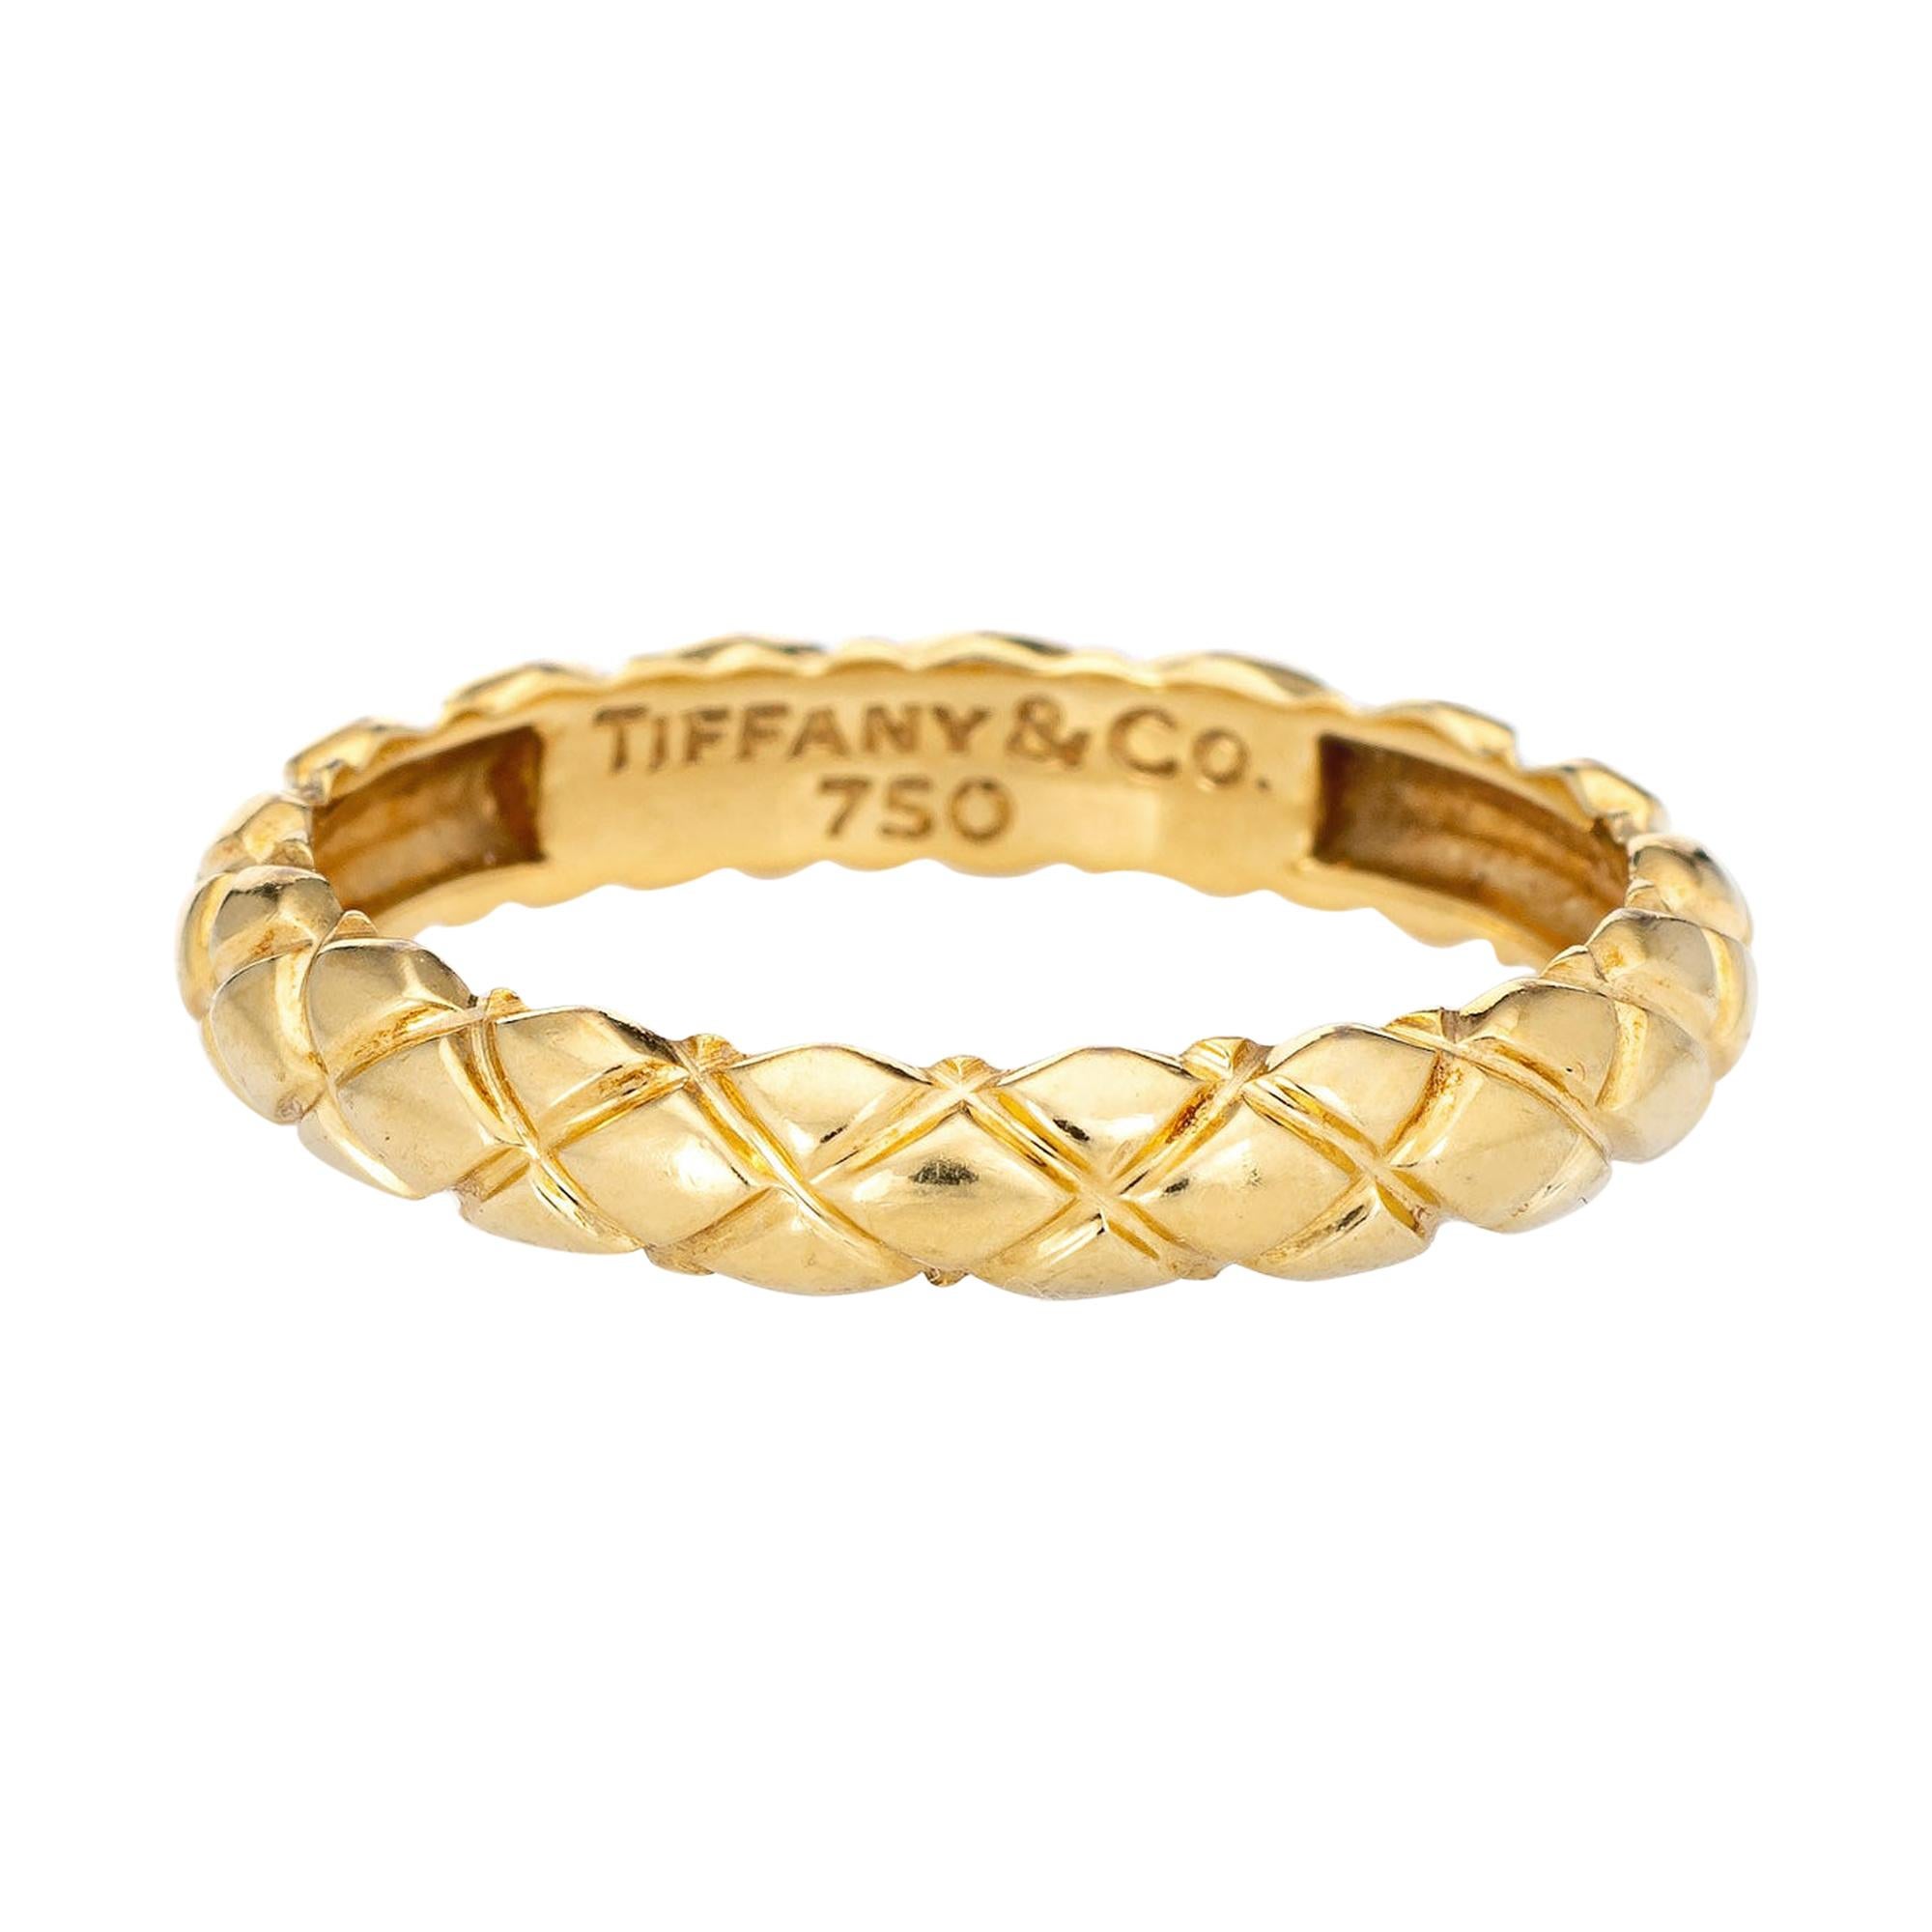 Tiffany & Co Quilt Pattern Ring 18k Yellow Gold Band Vintage Jewelry